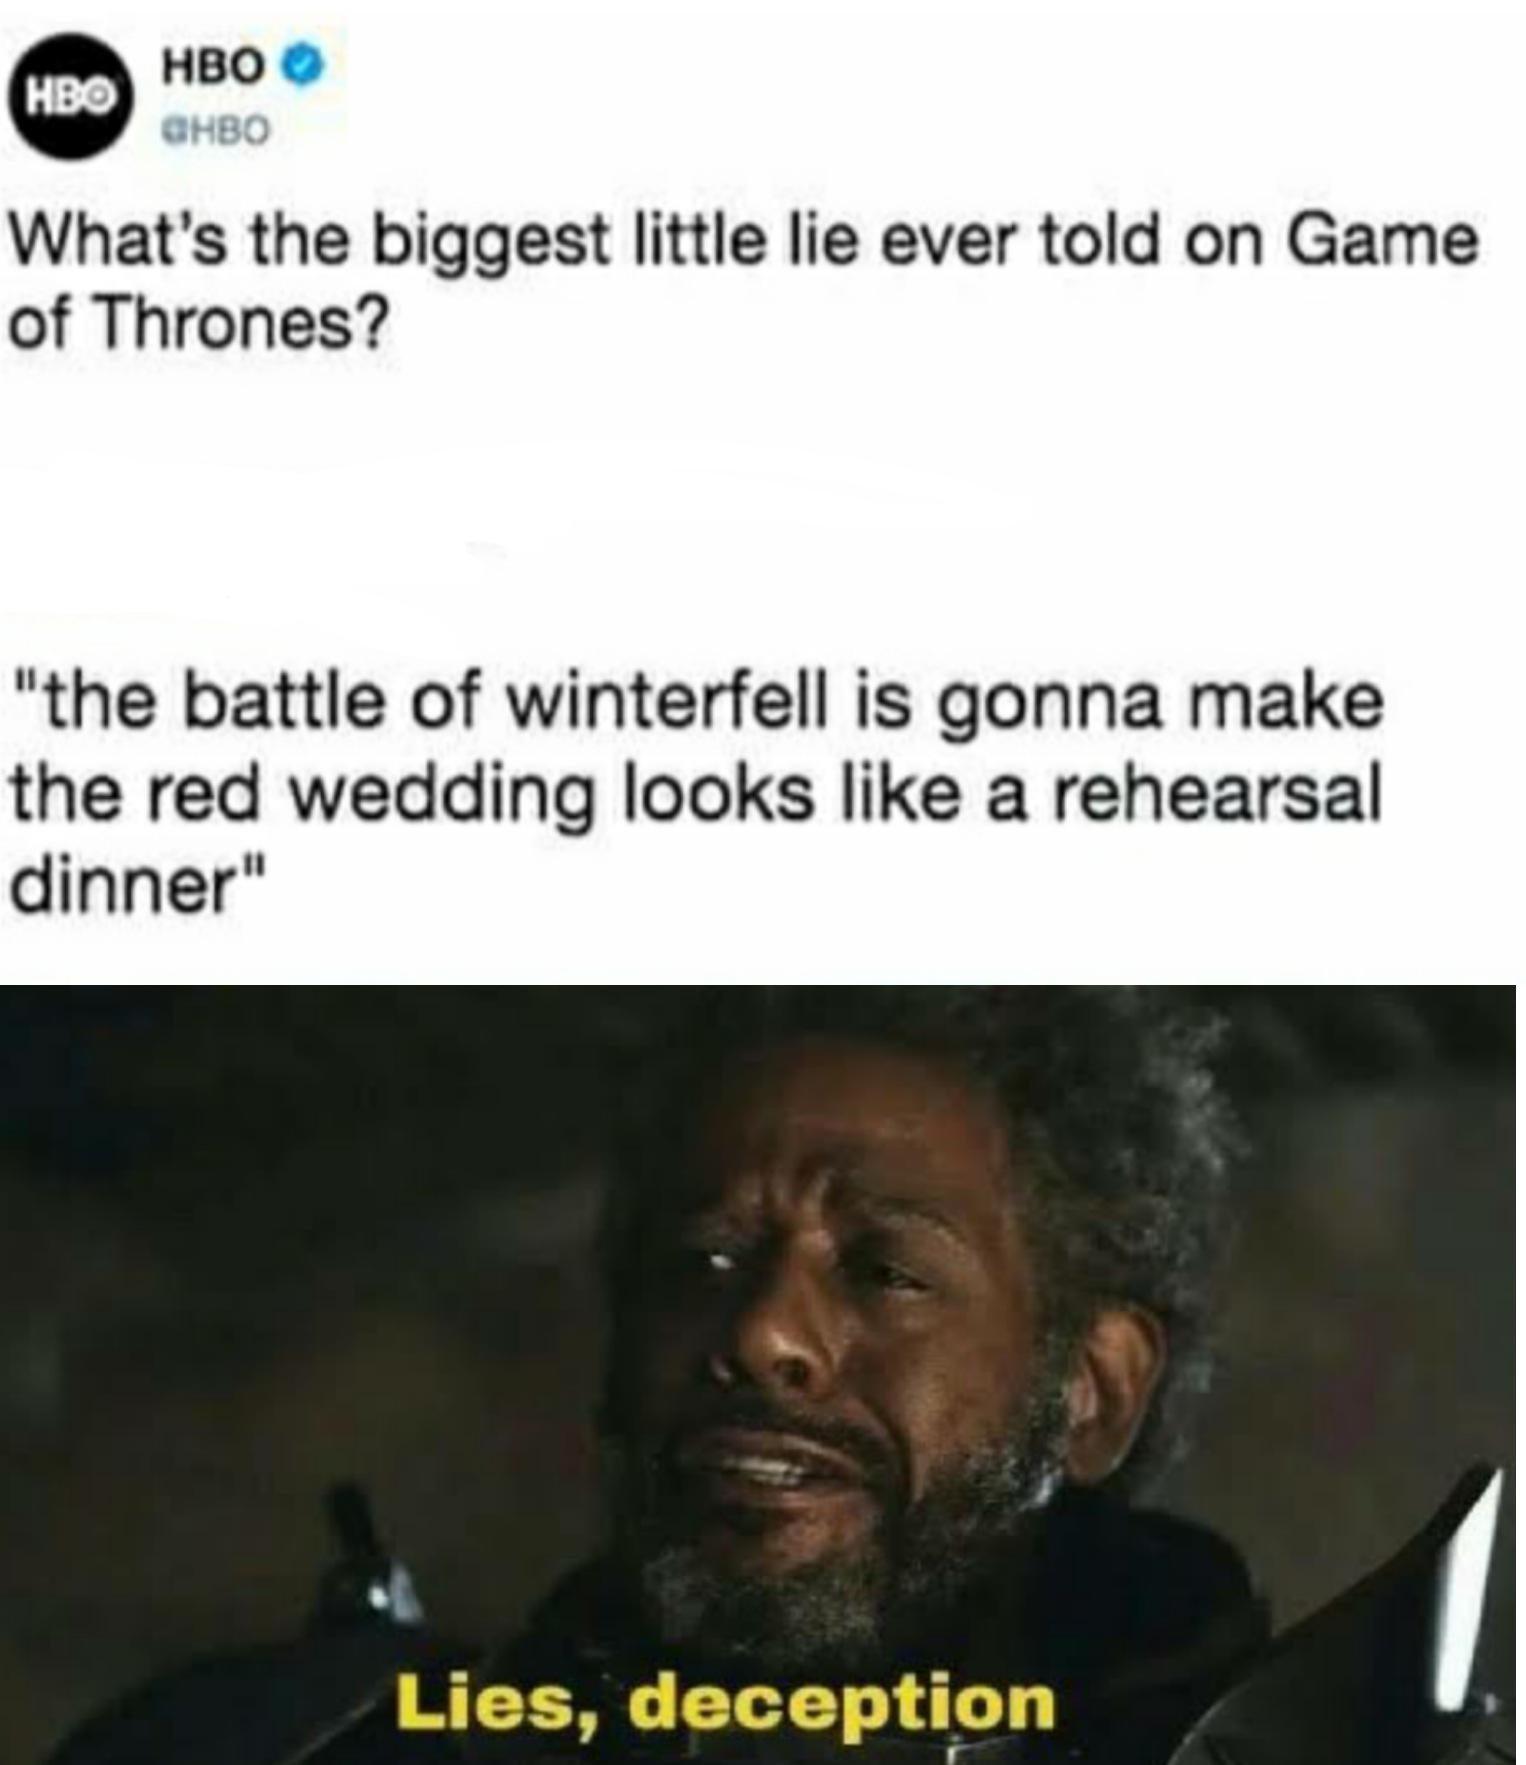 D-n-d,  Game of thrones memes D-n-d,  text: HBO O at-ABO What's the biggest little lie ever told on Game of Thrones? 